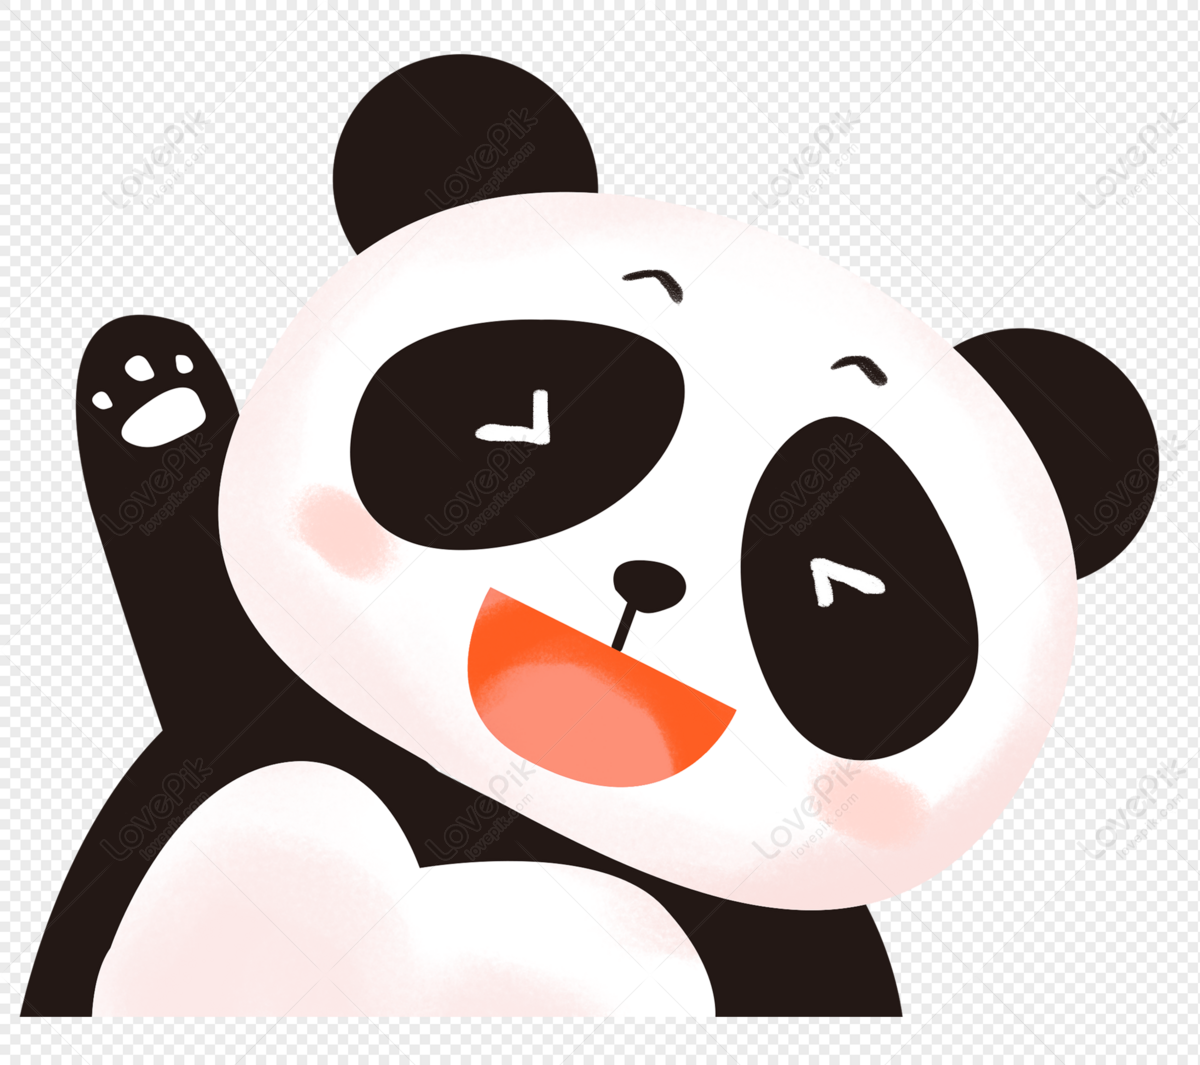 With cute cartoon panda for the girl Royalty Free Vector